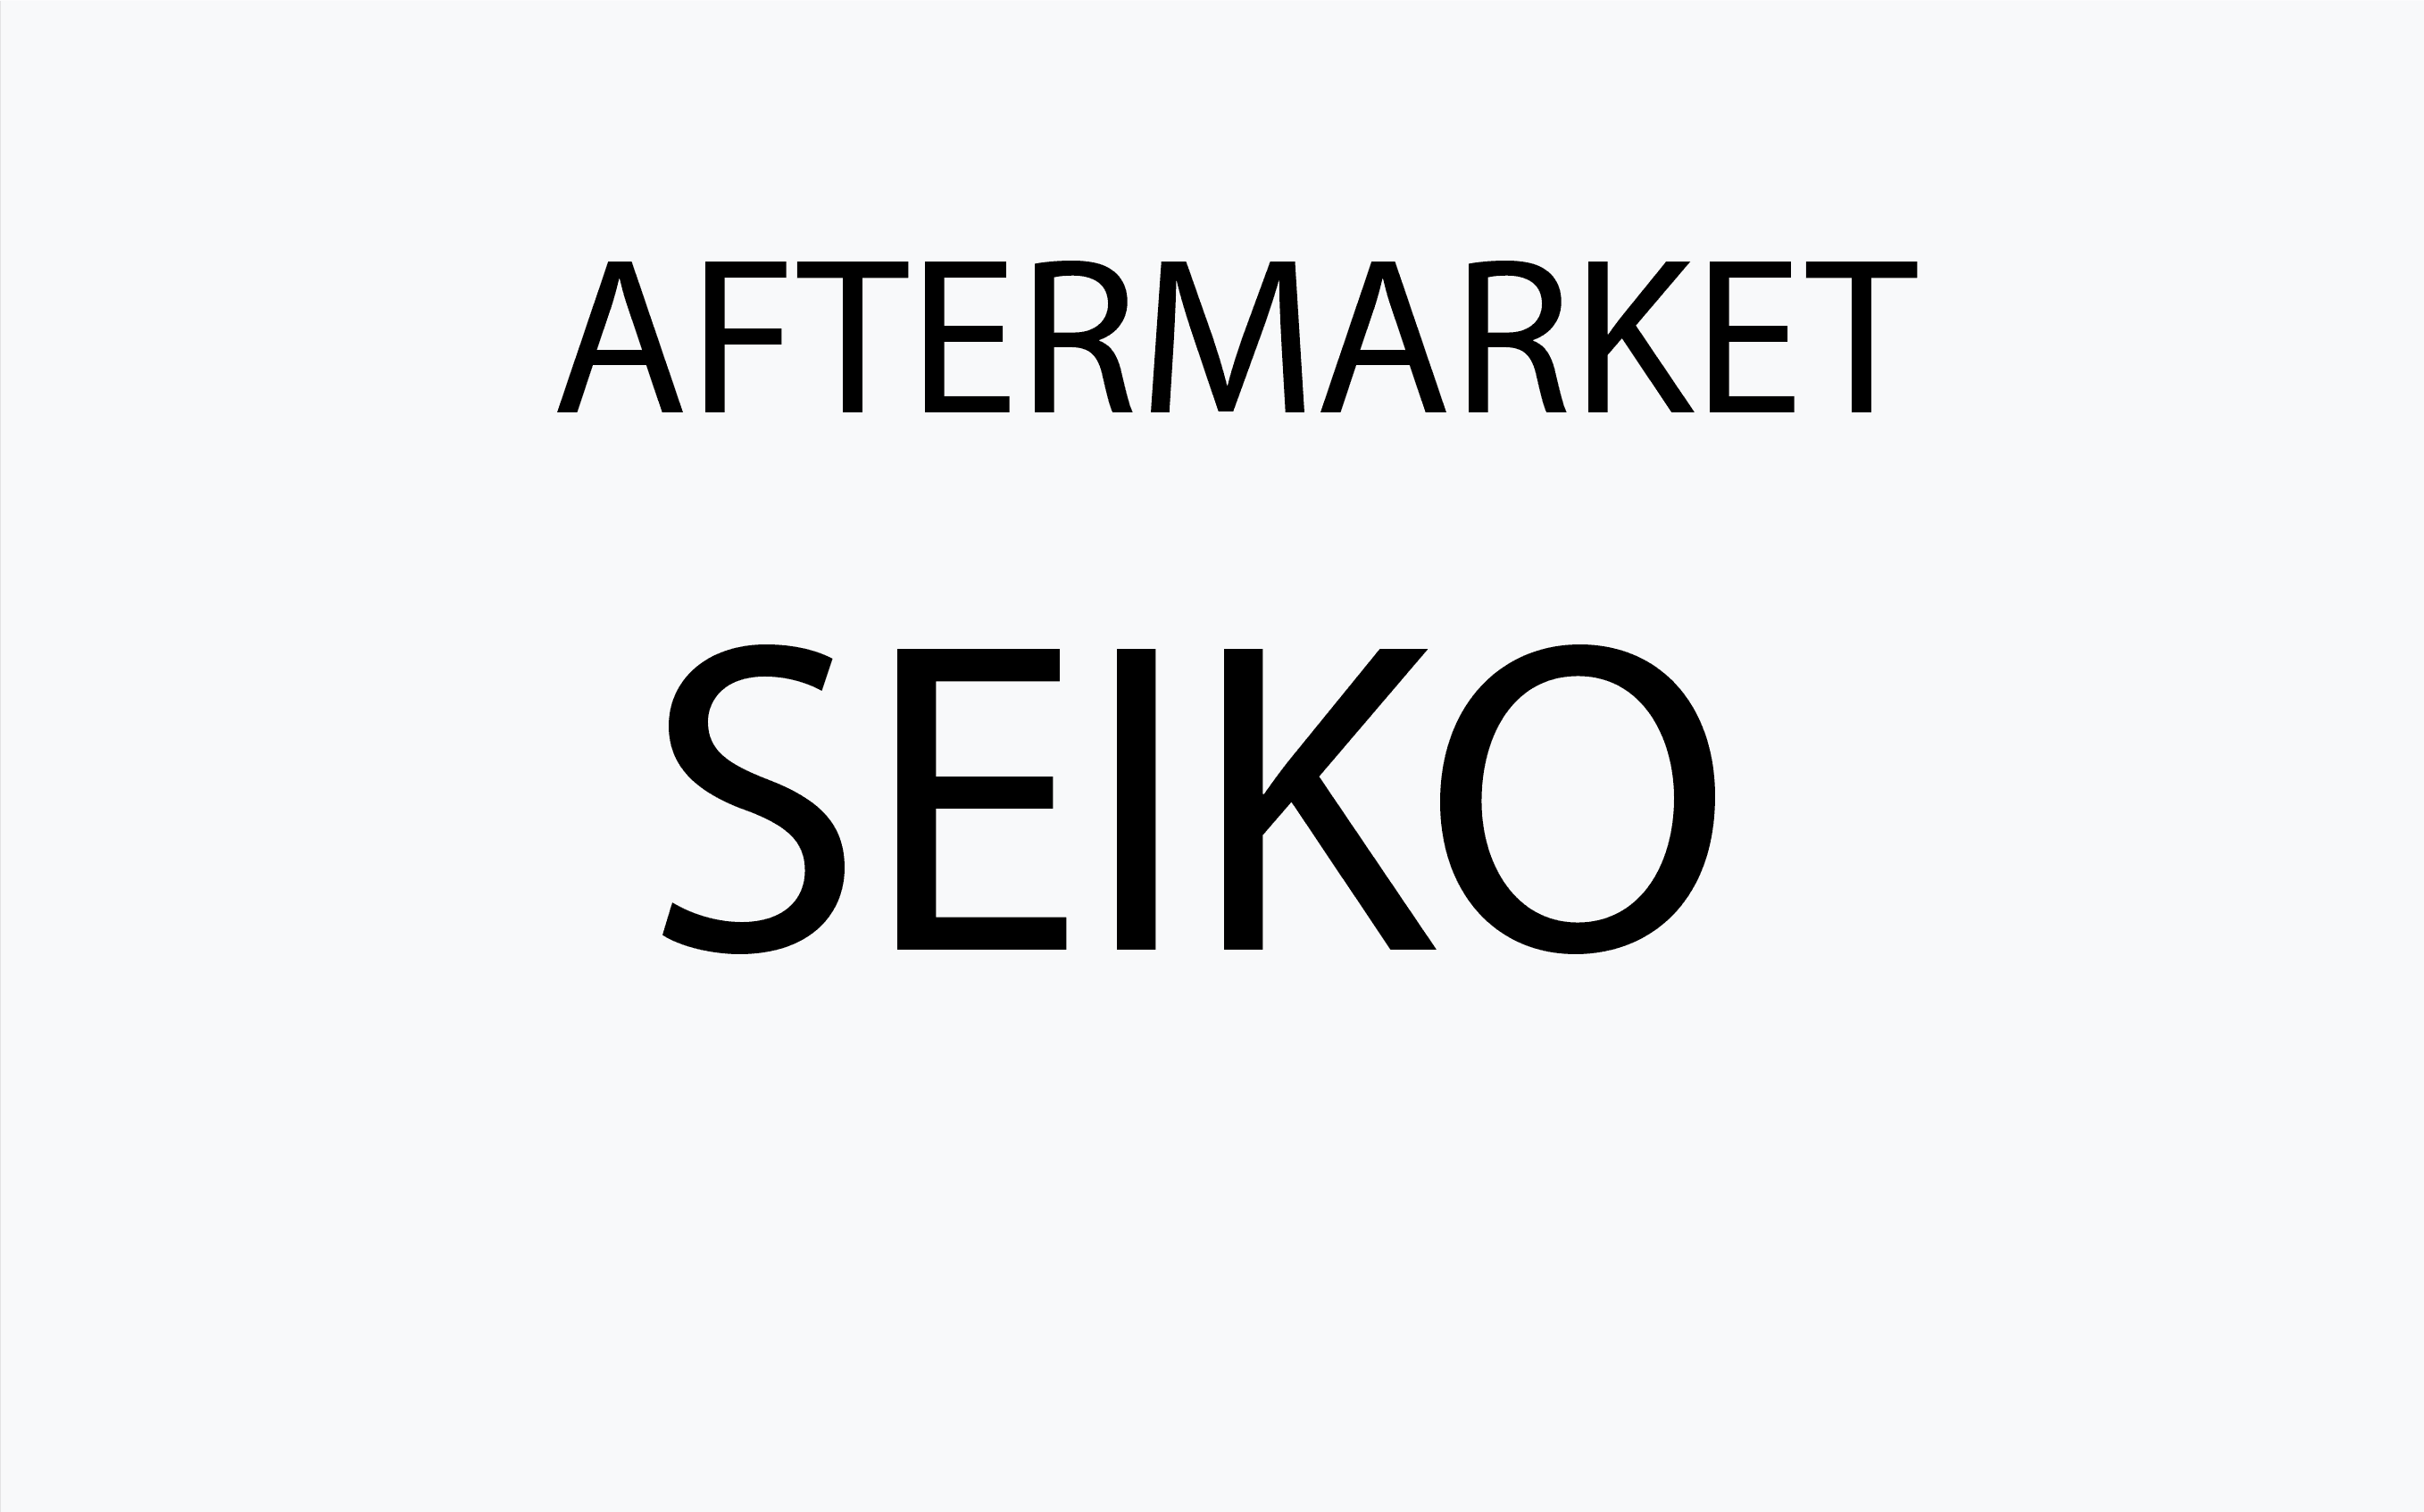 Aftermarket Seiko category